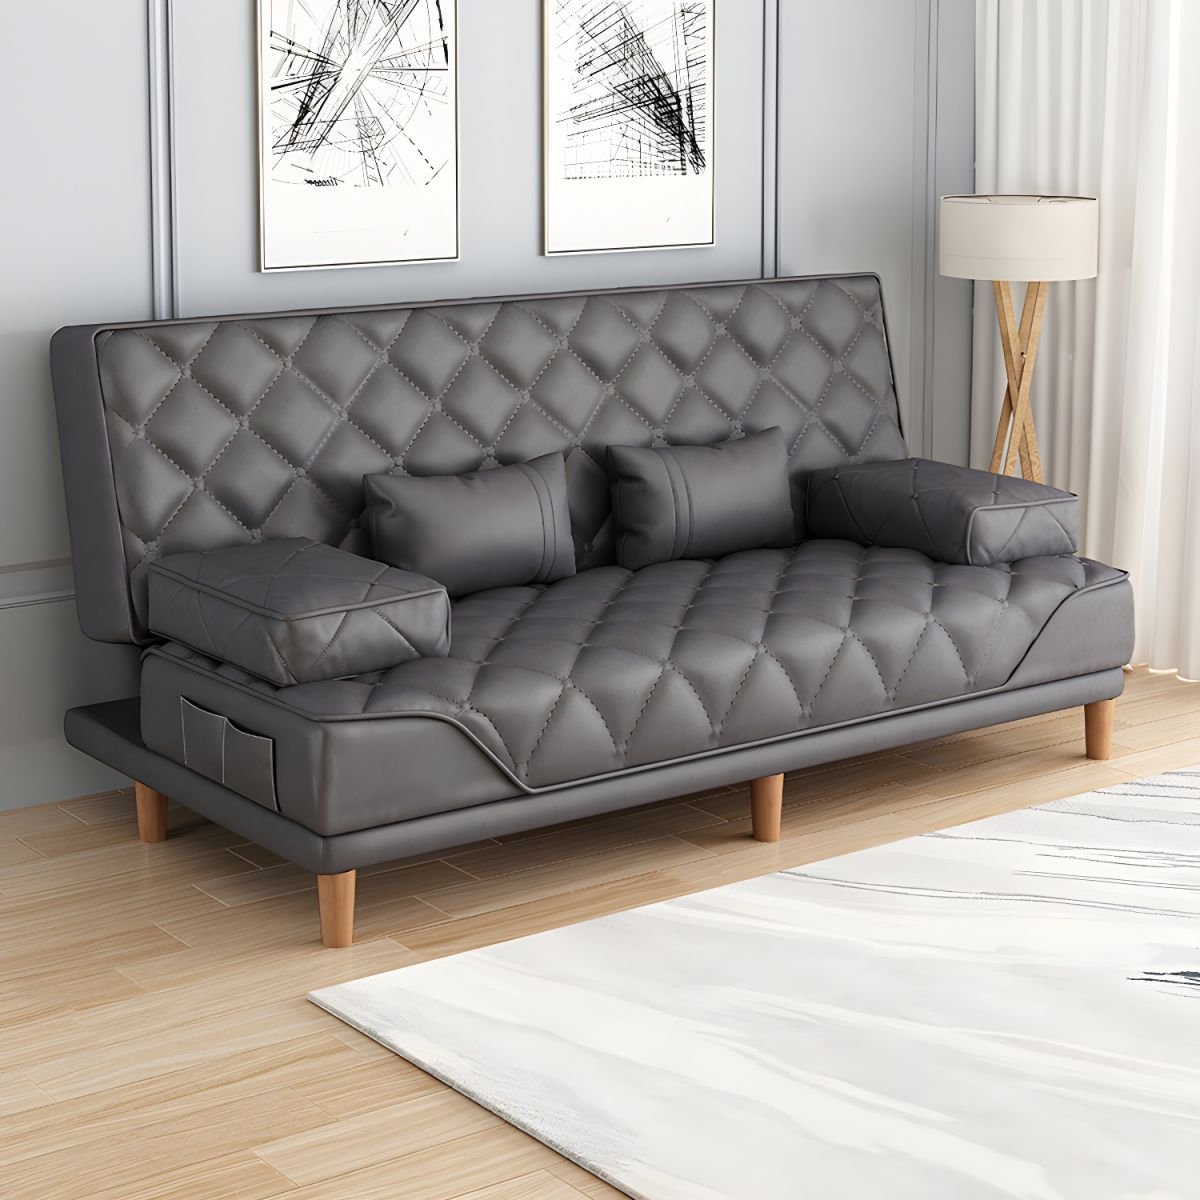 Contemporary Tight Back Convertible Sofa and Chaise with Pillow Top Arm - 47"L x 30"W x 34"H Dark Gray Tech Cloth